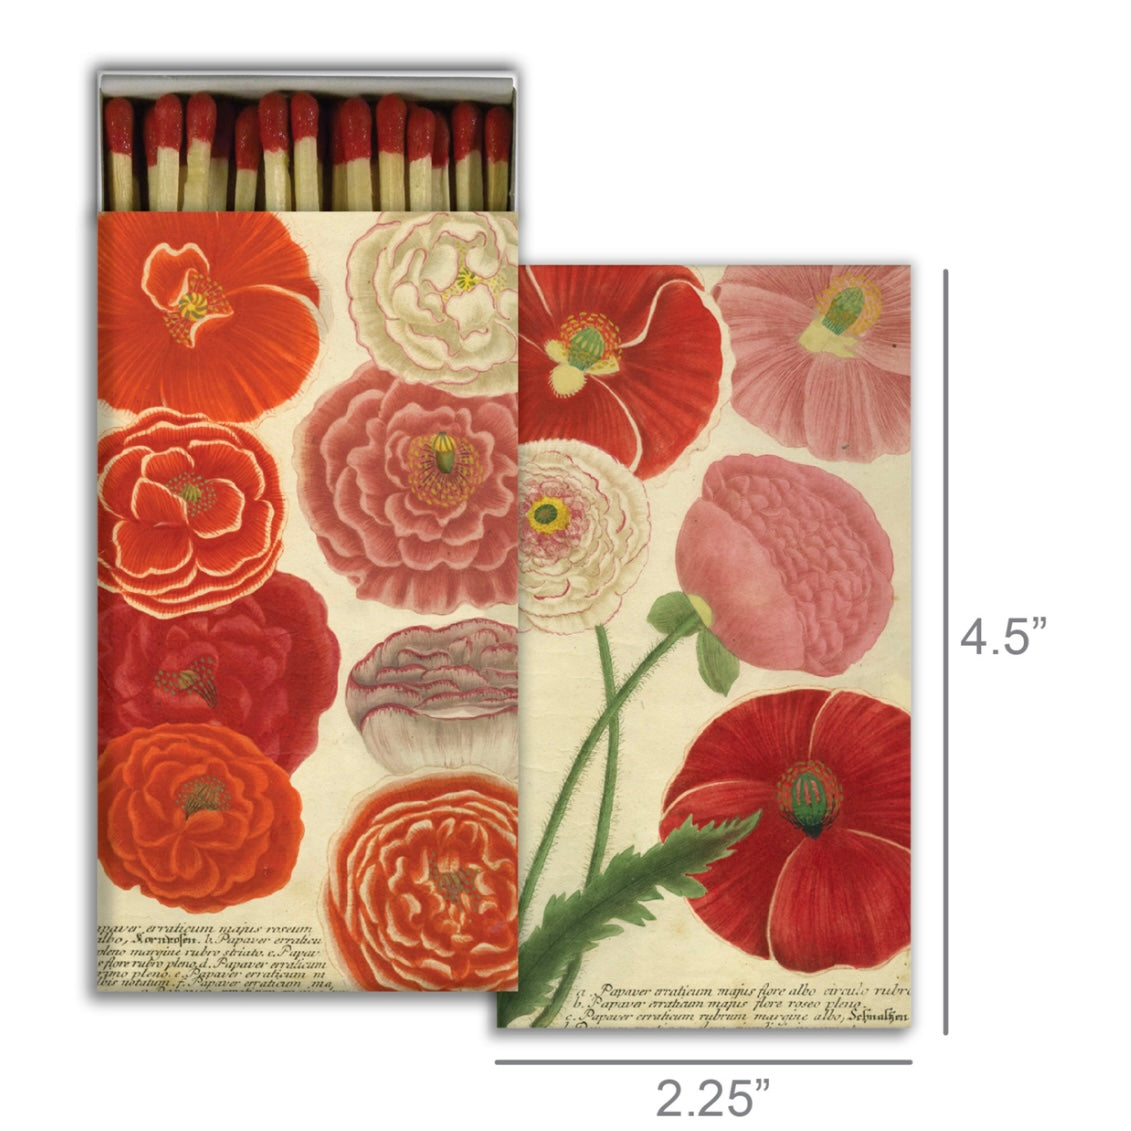 Poppies decorative jumbo matches. A quintessential article of daily use, our Match Boxes flaunt unique designs with coordinating match tips. Sweet as a hostess gift, a perfect pairing to a candle and always an eye catching pop of graphic decor. Safety matches, 50 sticks per box.  Match boxes measure 4.5x2.5x.75.